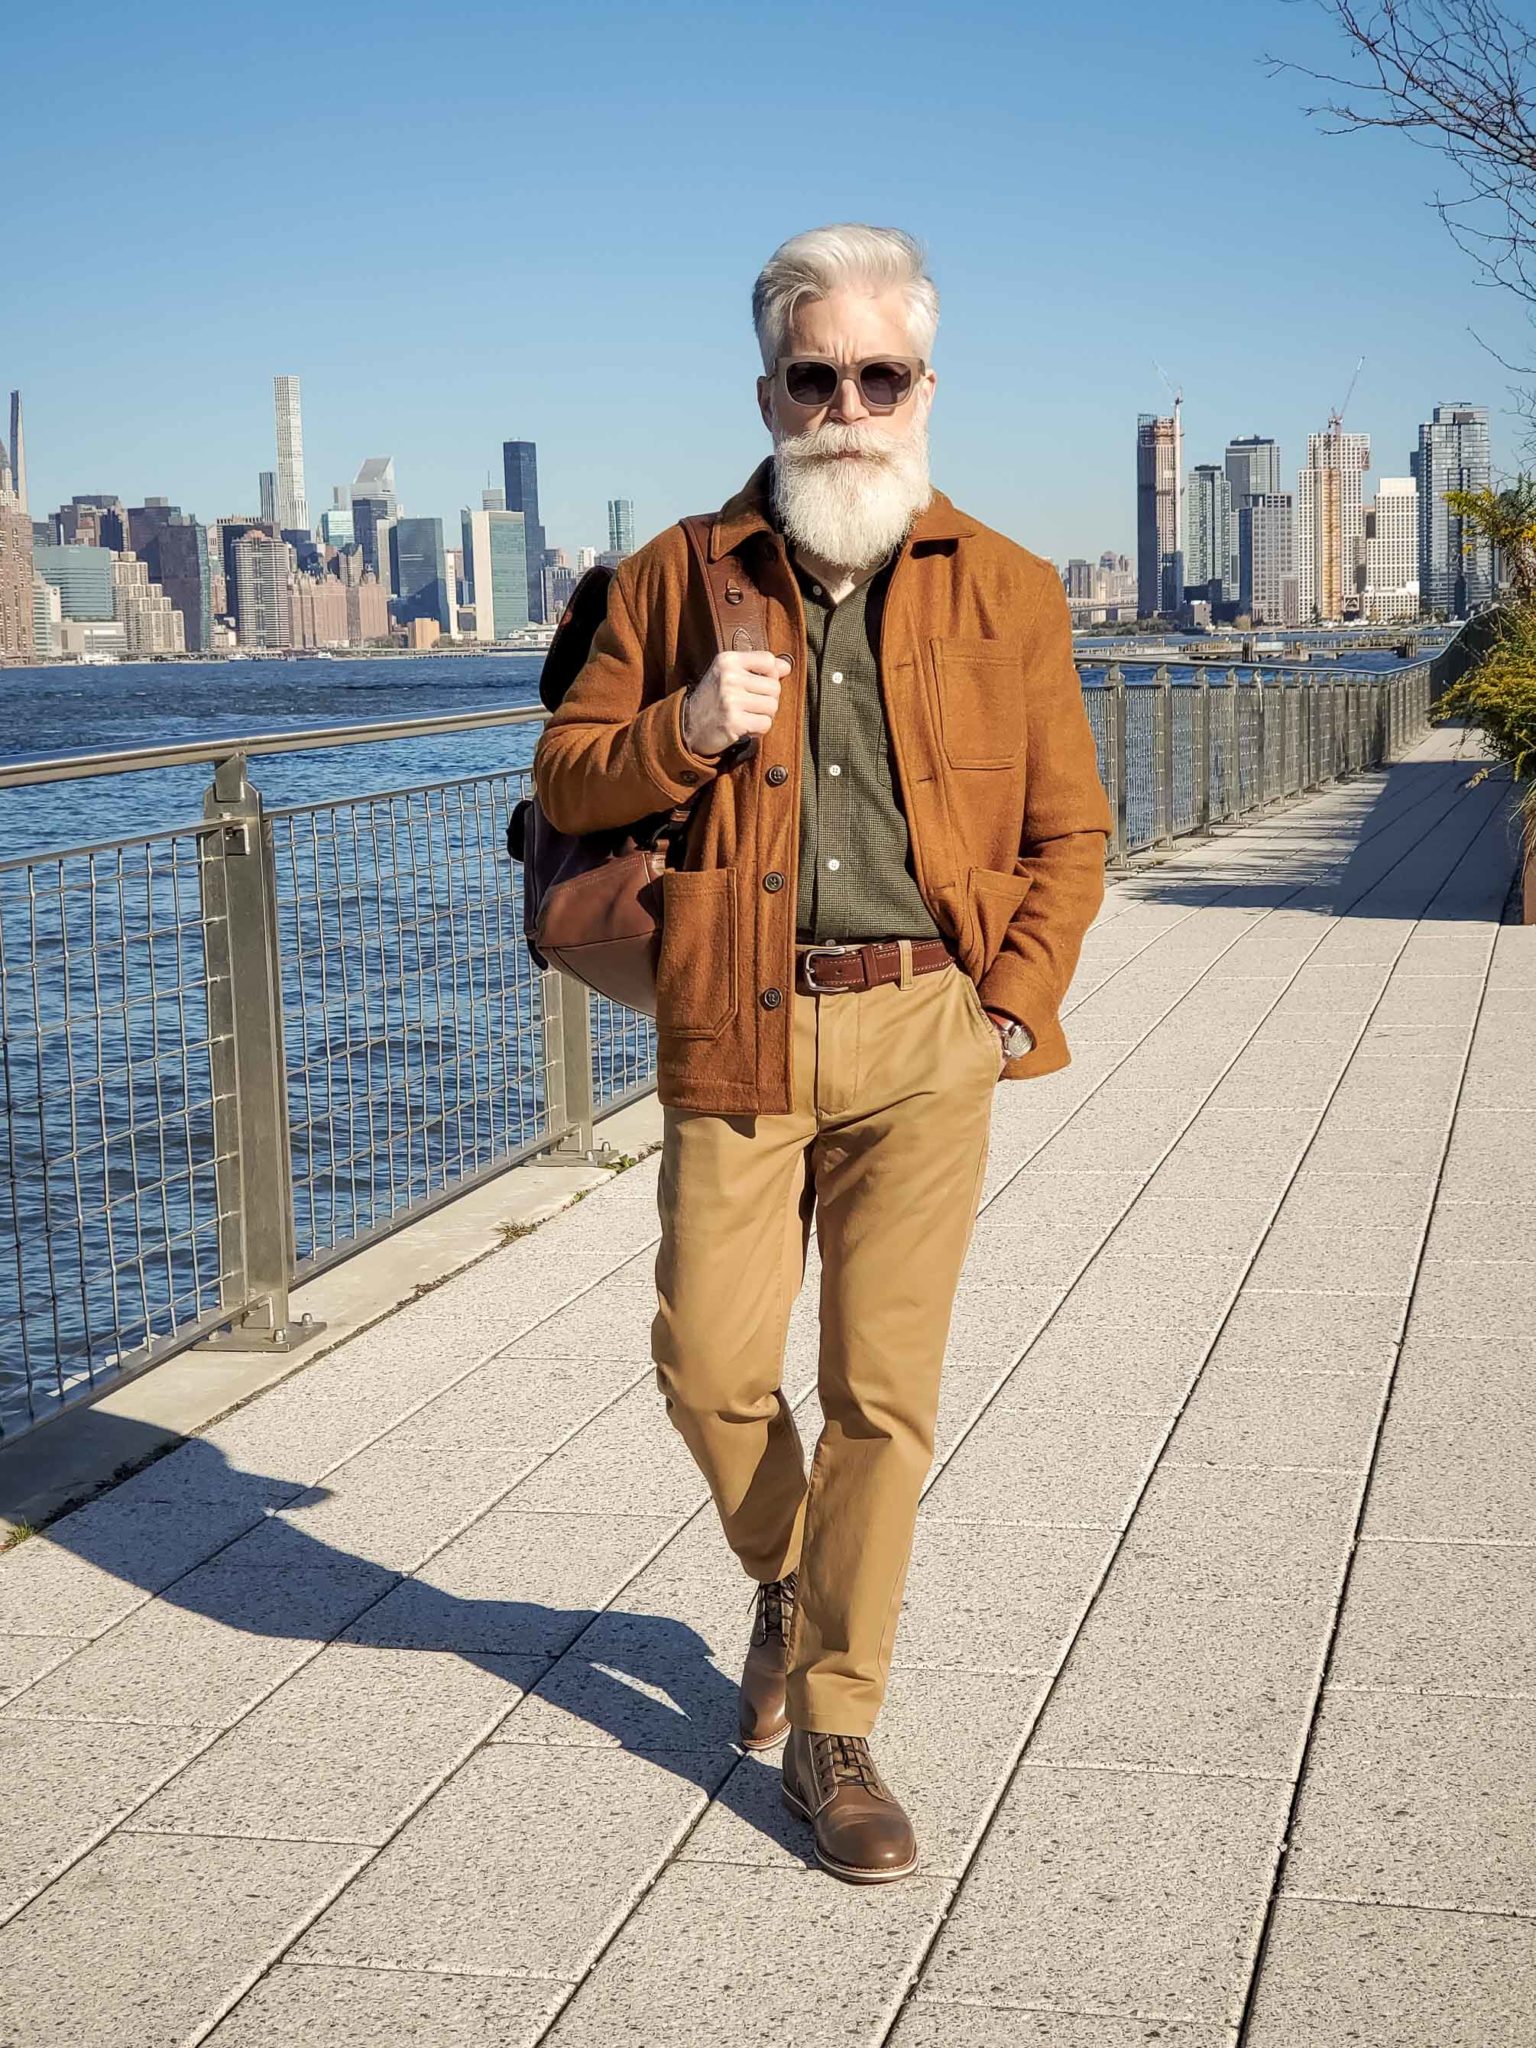 Smart Casual Earth Tones - The Modest Man